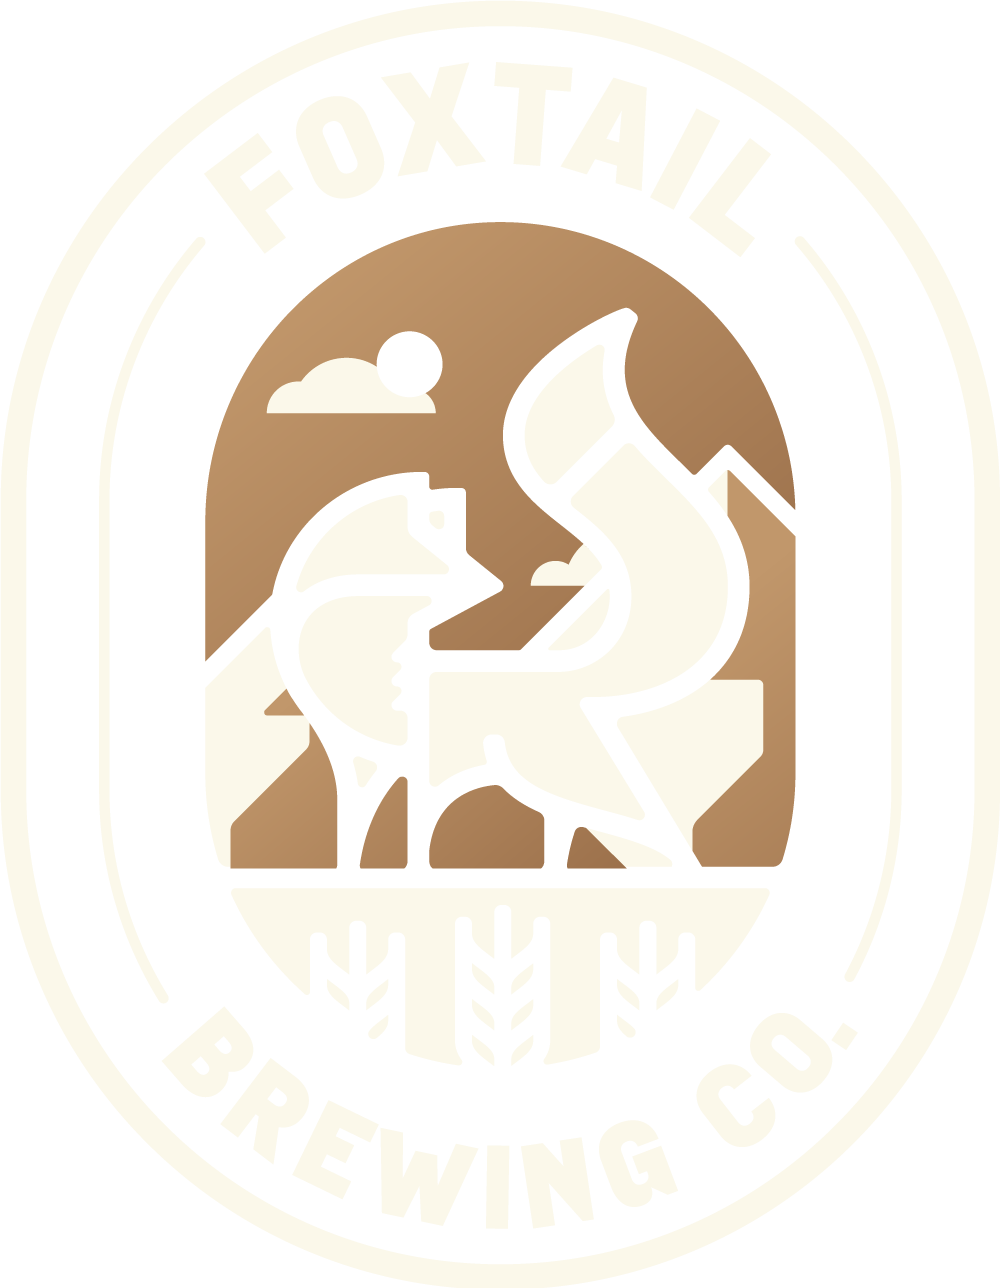 Foxtail Brewing Co.